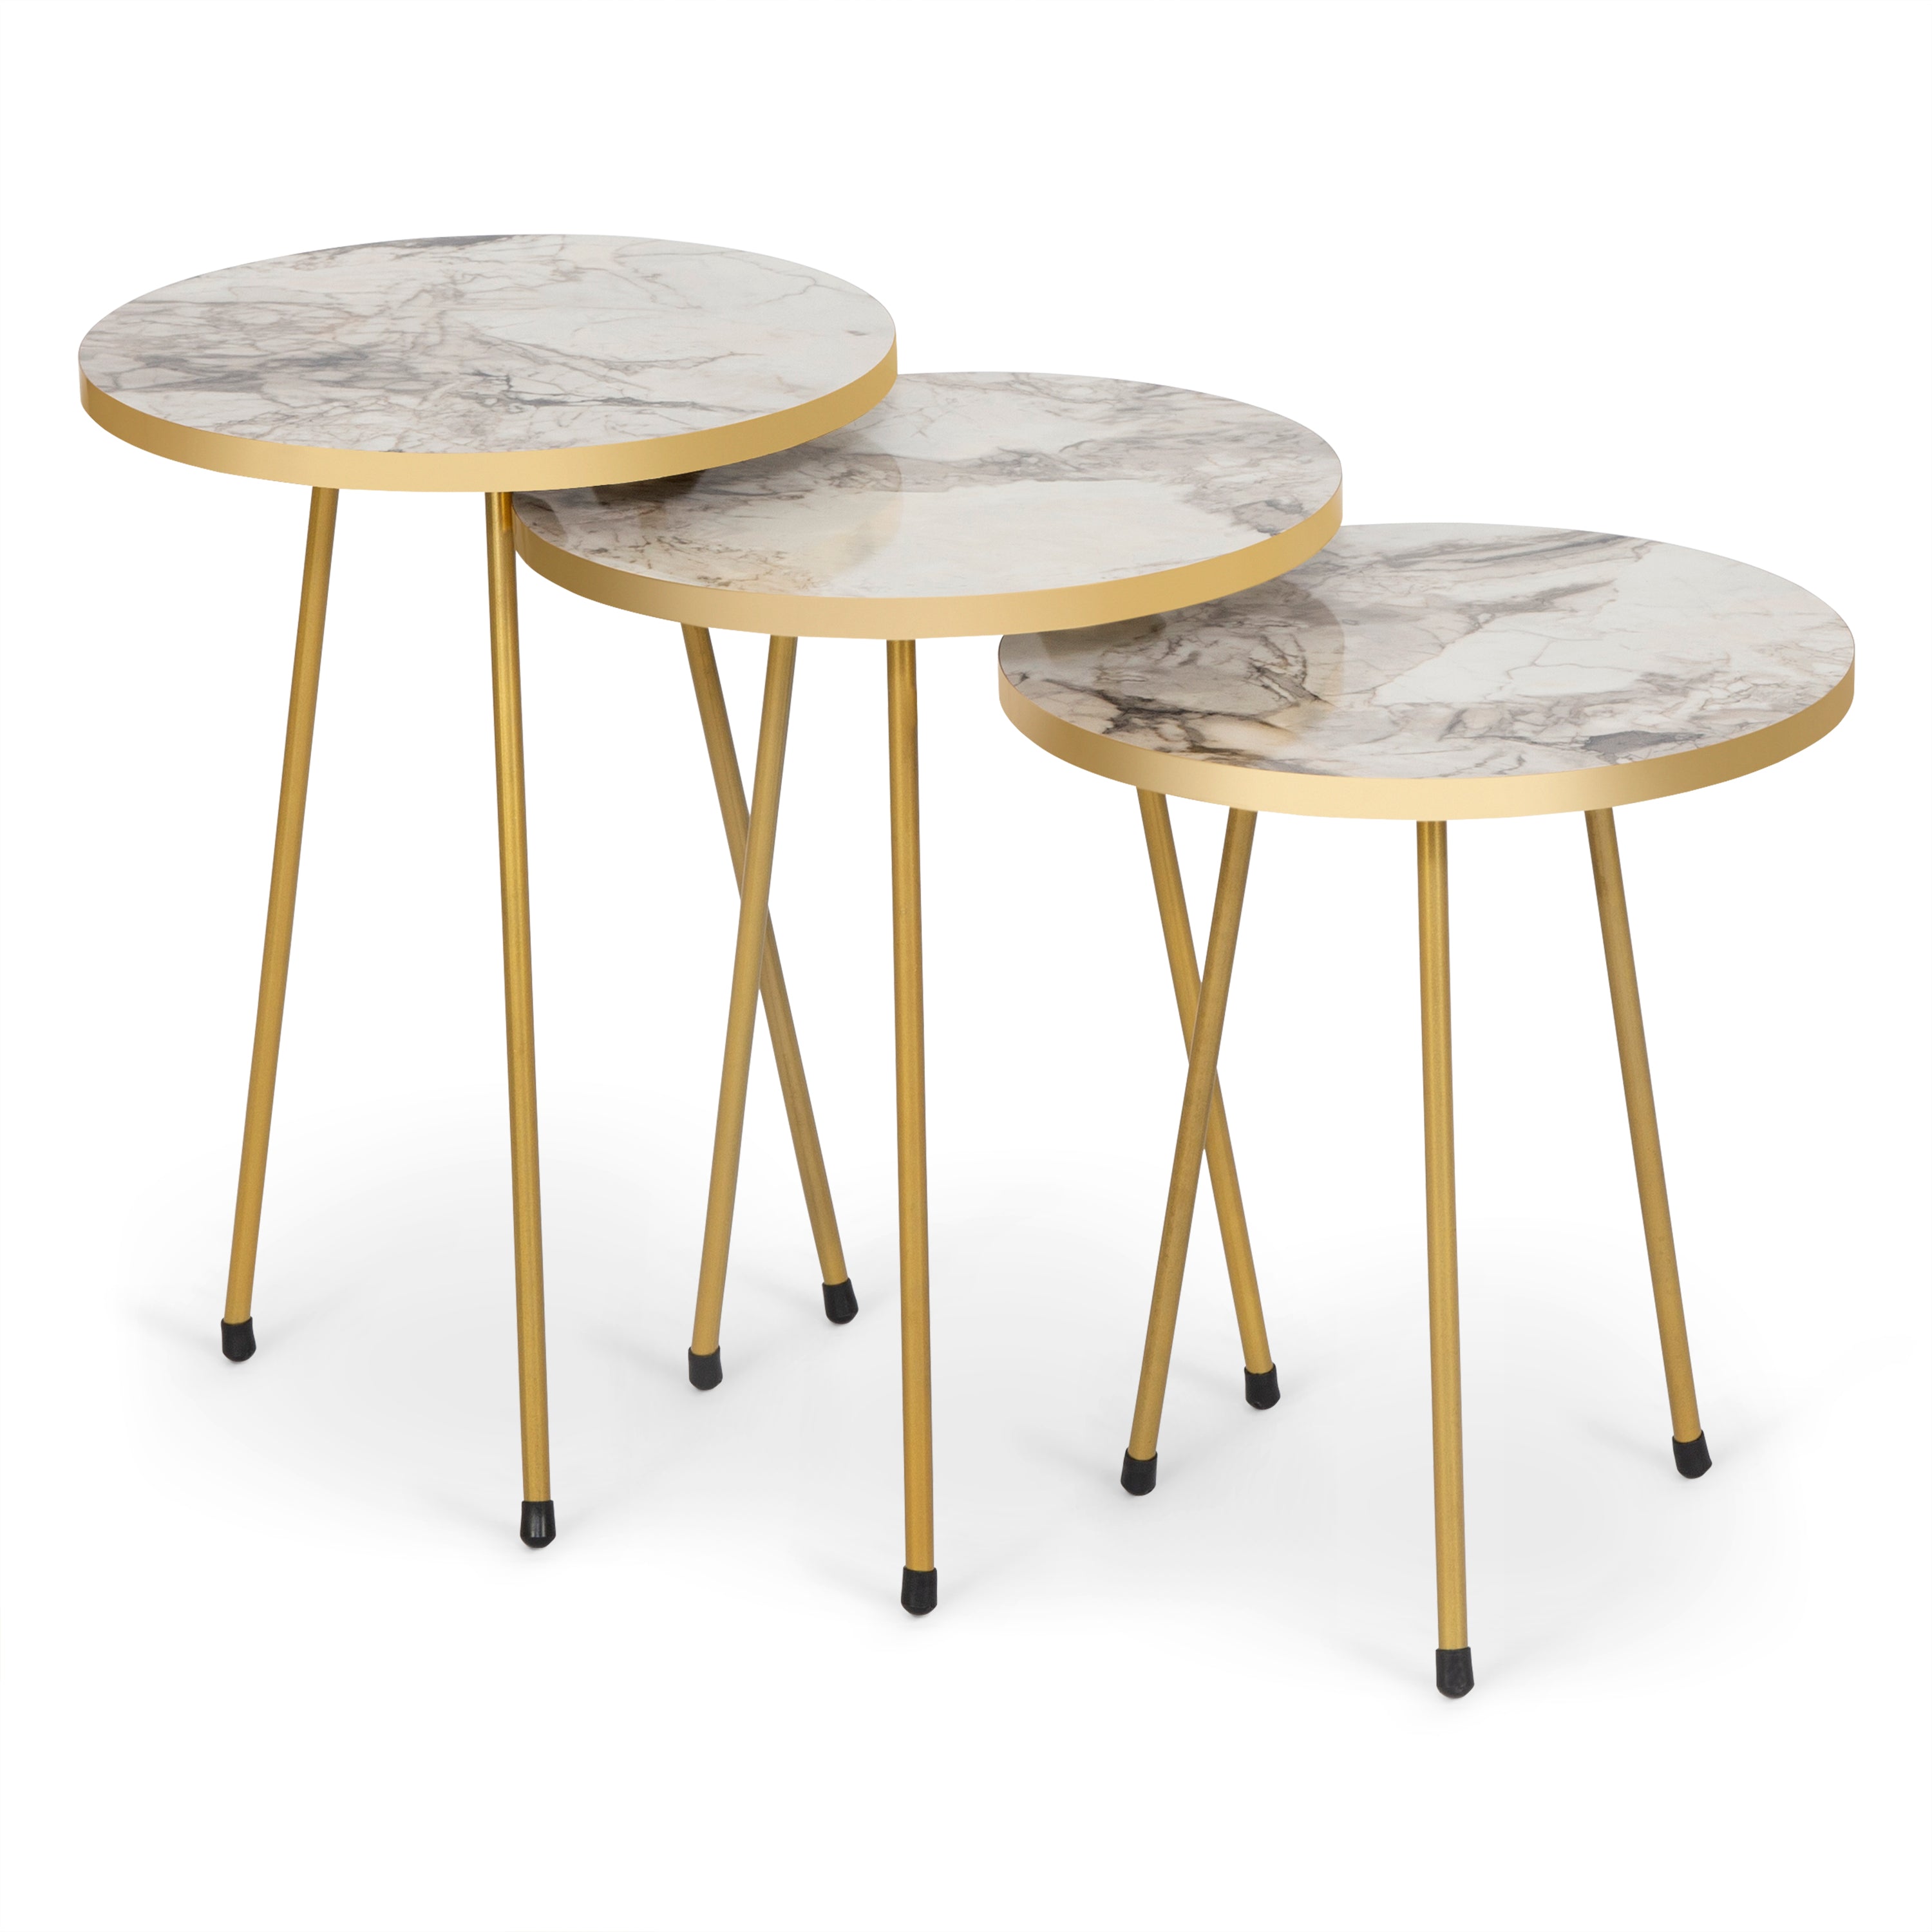 Sleek Set of 3 Round Side Tables - White Marble & Gold